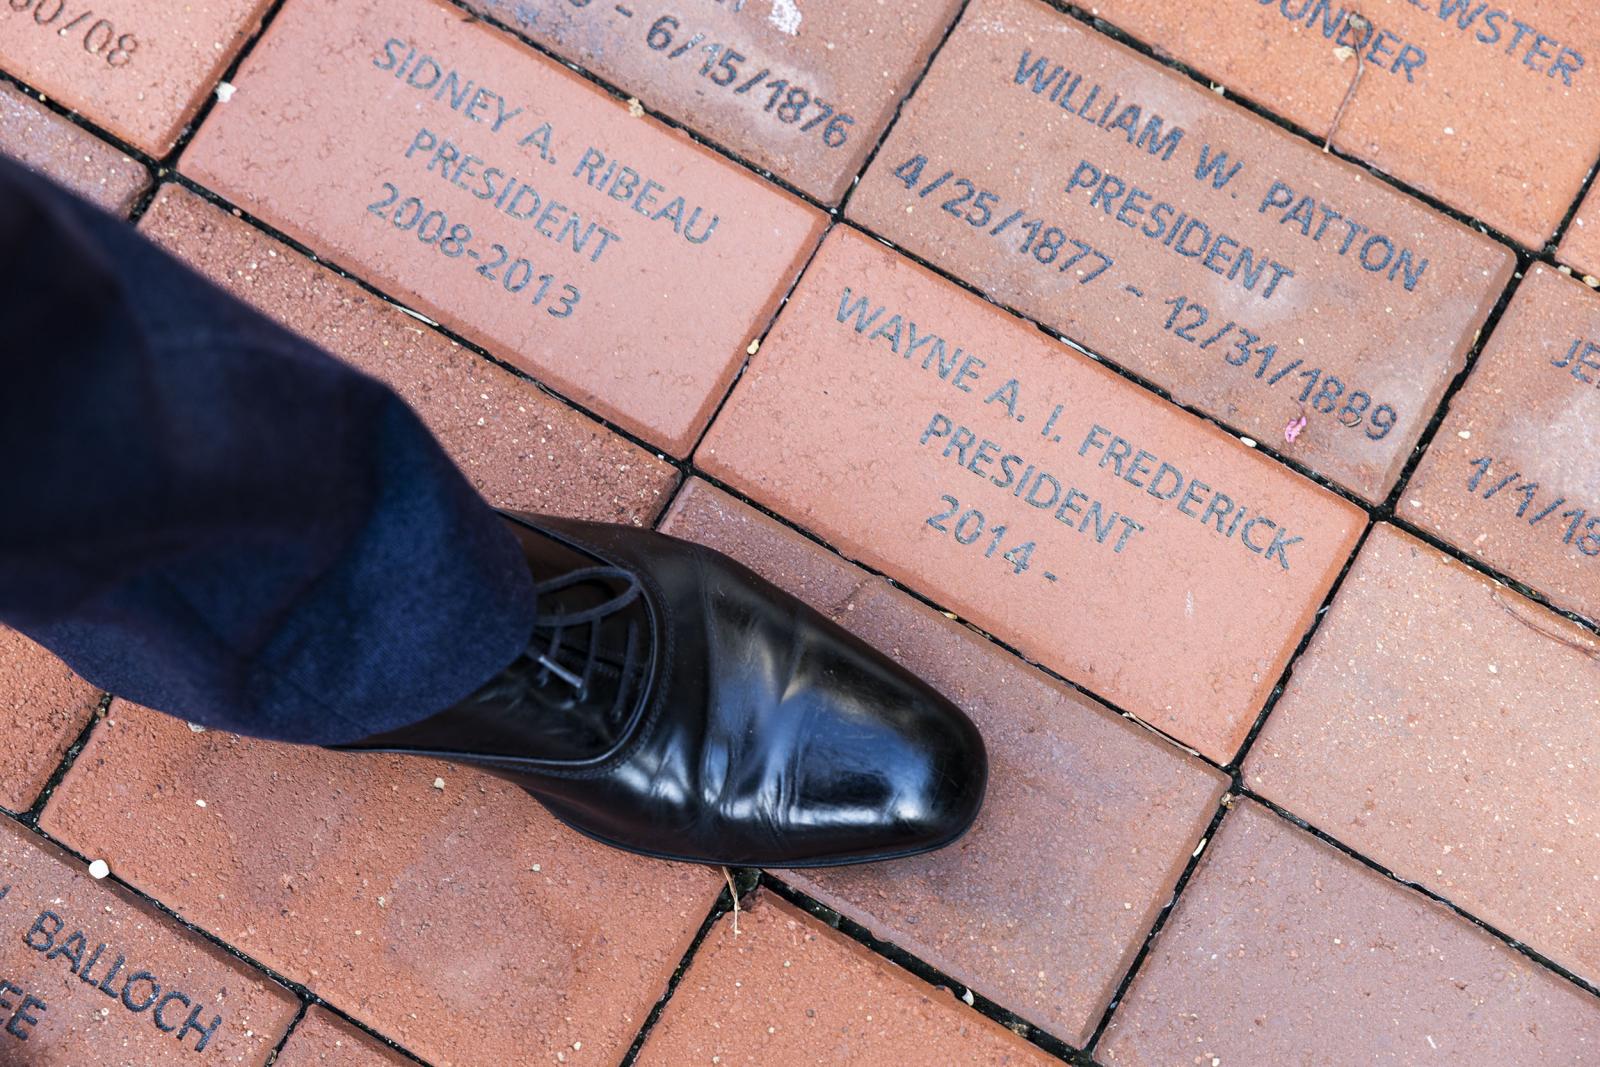 Dr. Frederick's shoe by his brick with name